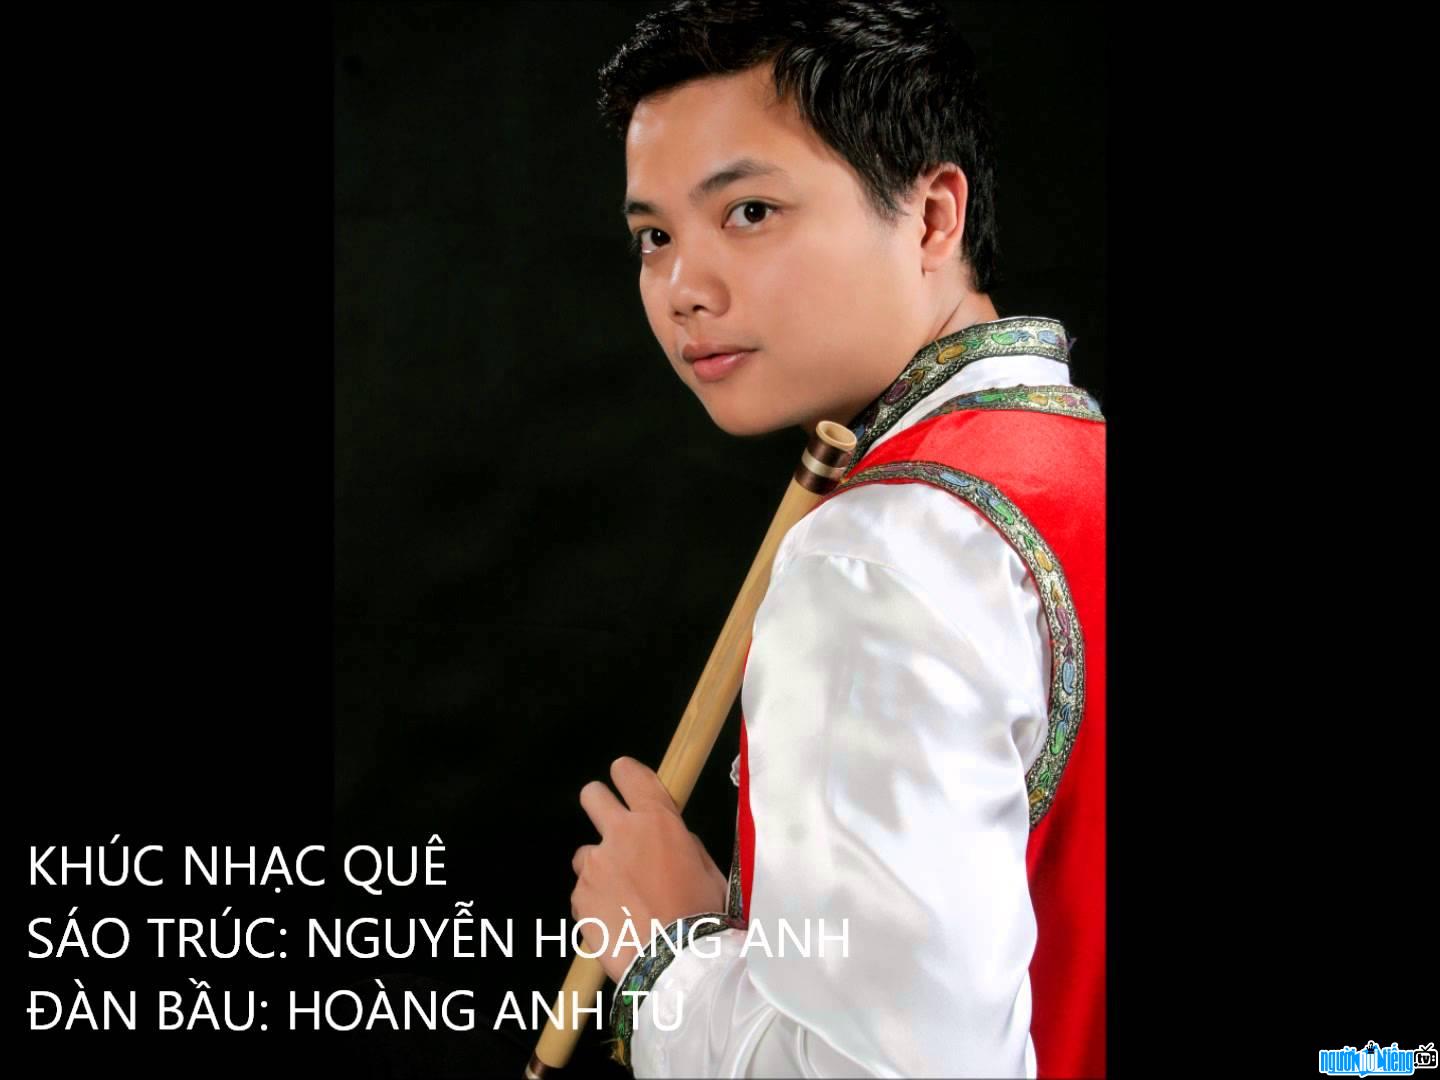  Nguyen Hoang Anh in the song "Country music"